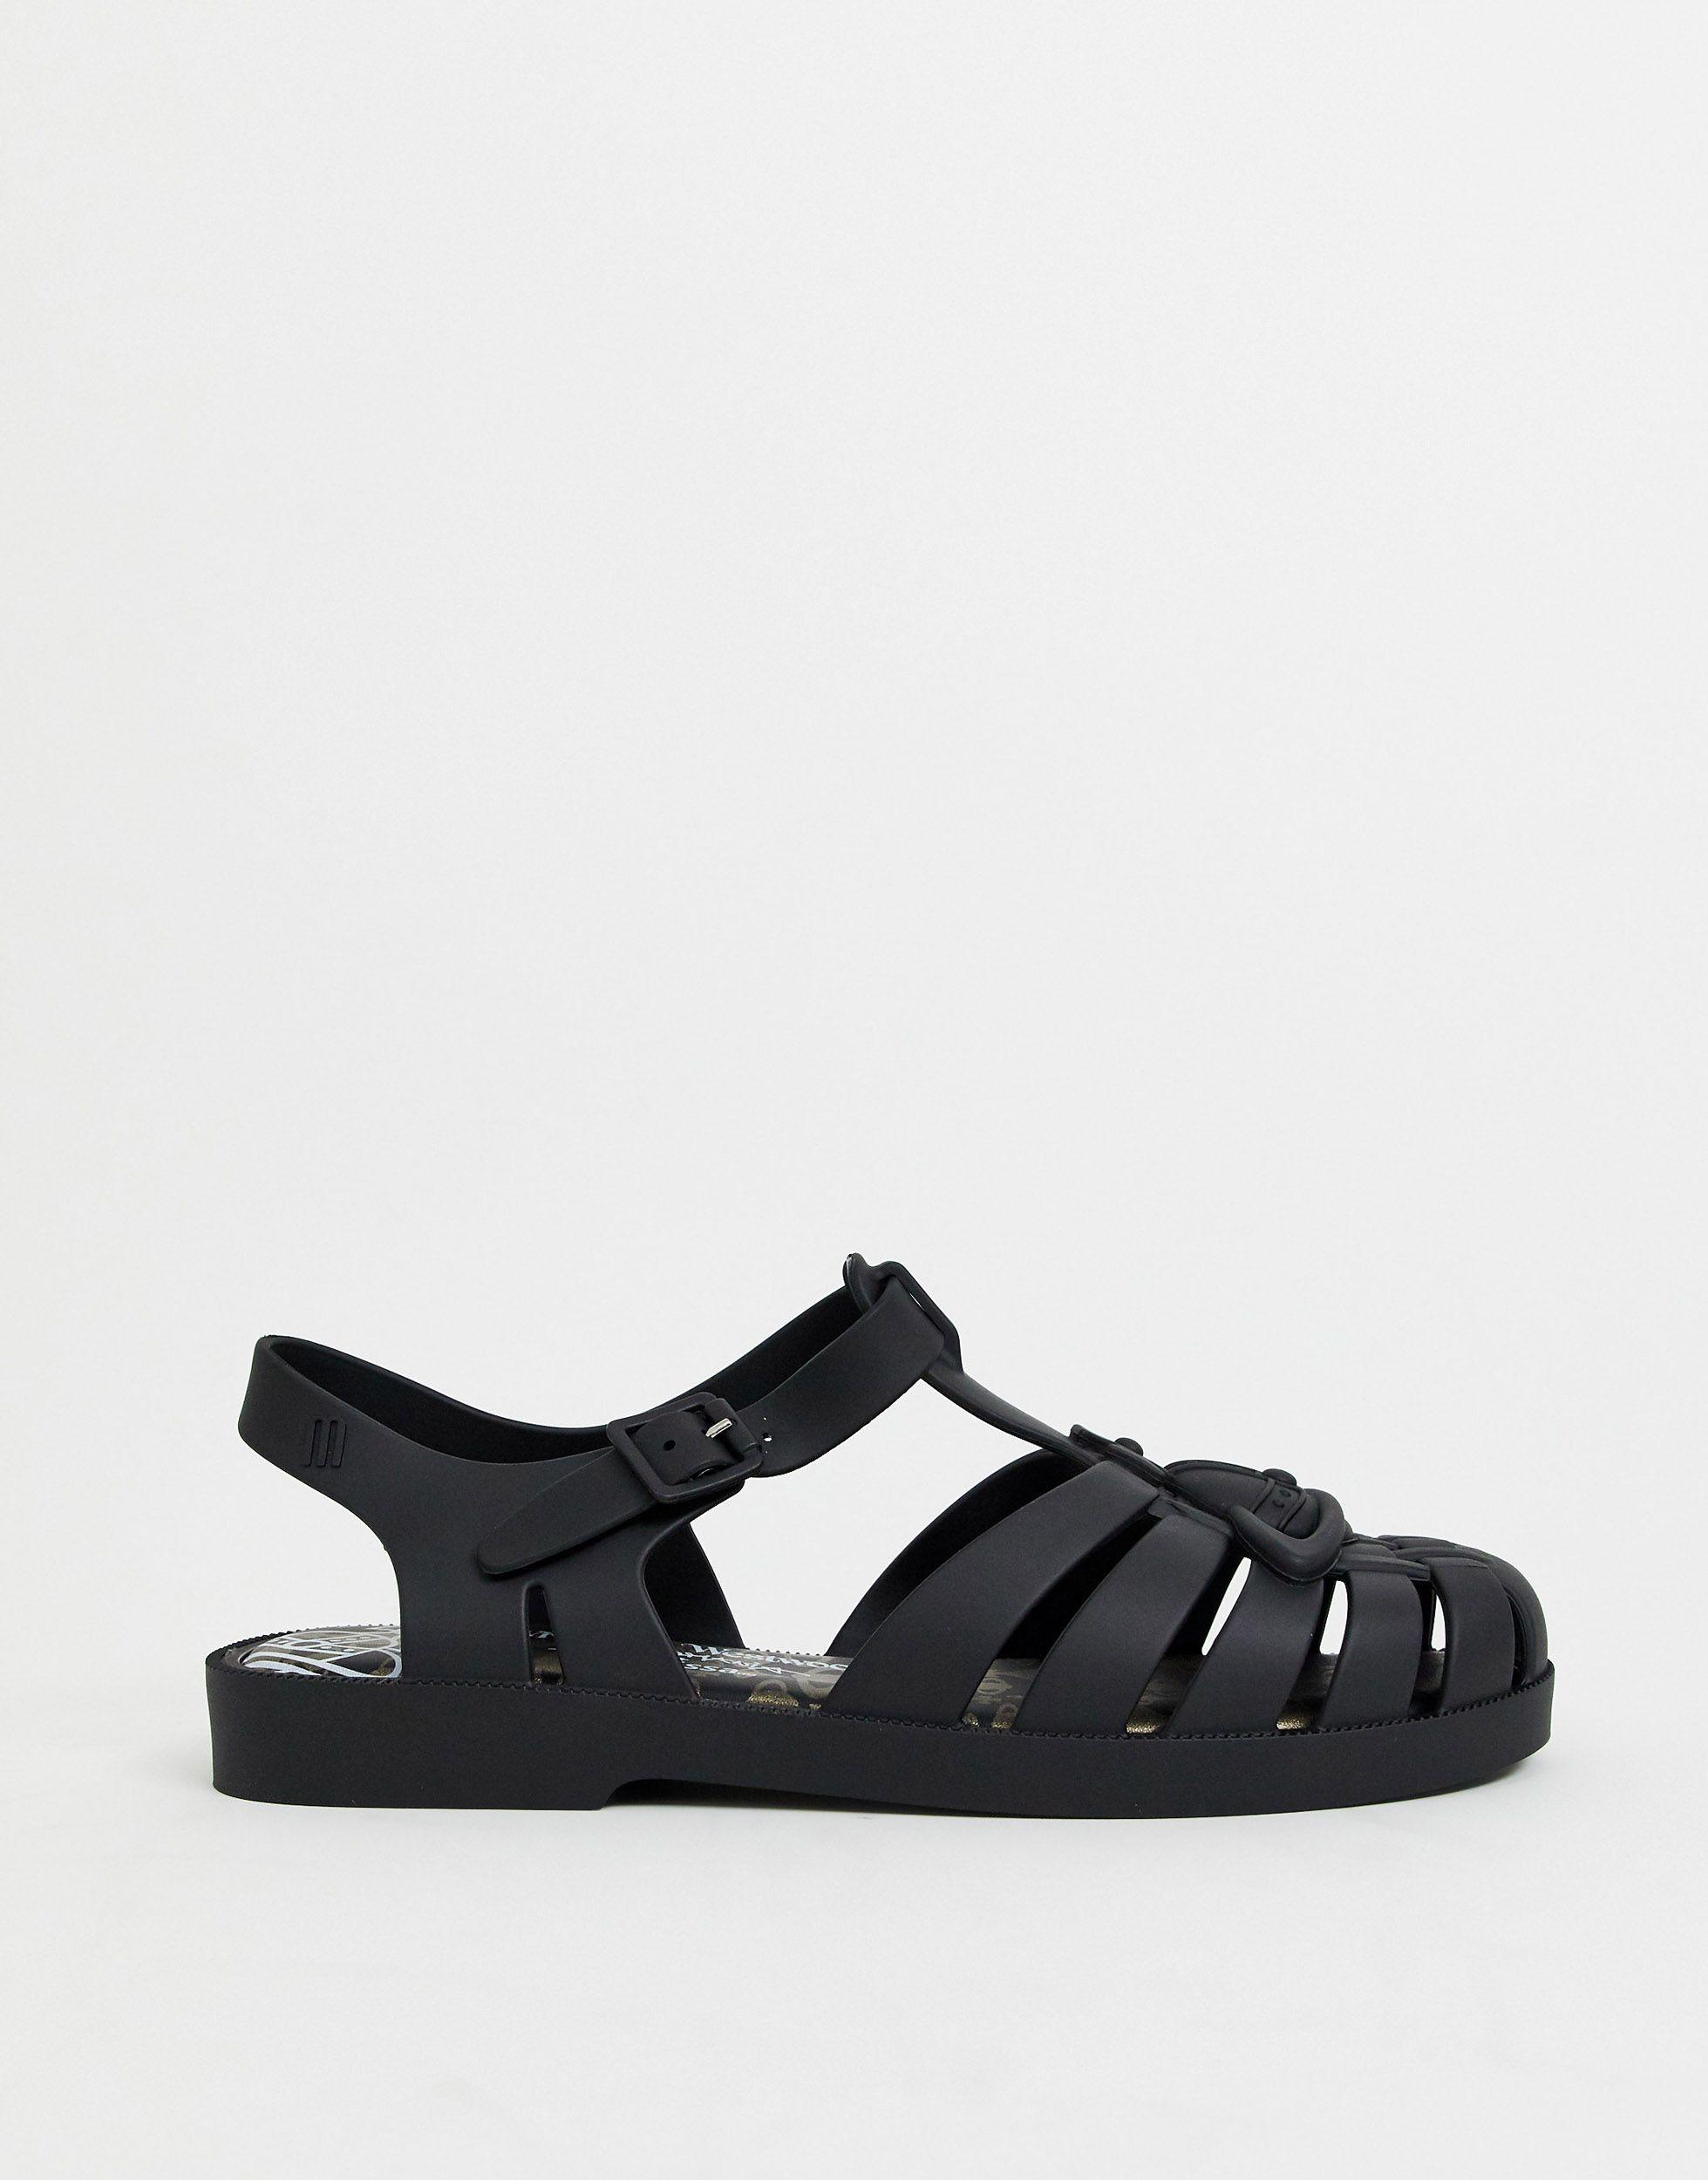 Melissa + Vivienne Westwood Anglomania Logo Trim Jelly Sandals in Black |  Lyst